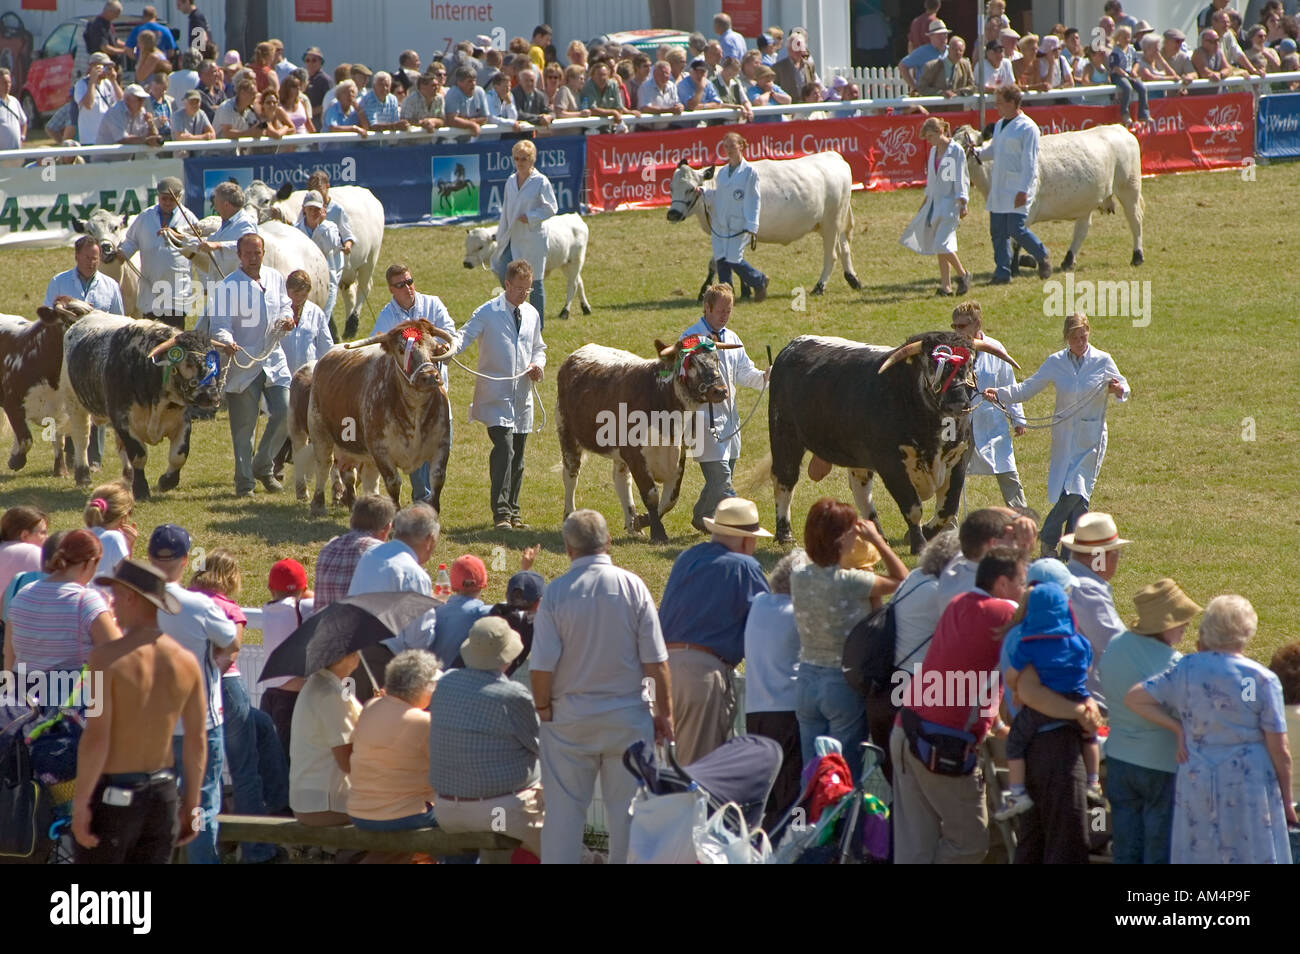 Winning cattle parade in the Main Ring at the Royal Welsh Agricultural Show, Llanelwedd, Powys, Wales, UK. Stock Photo